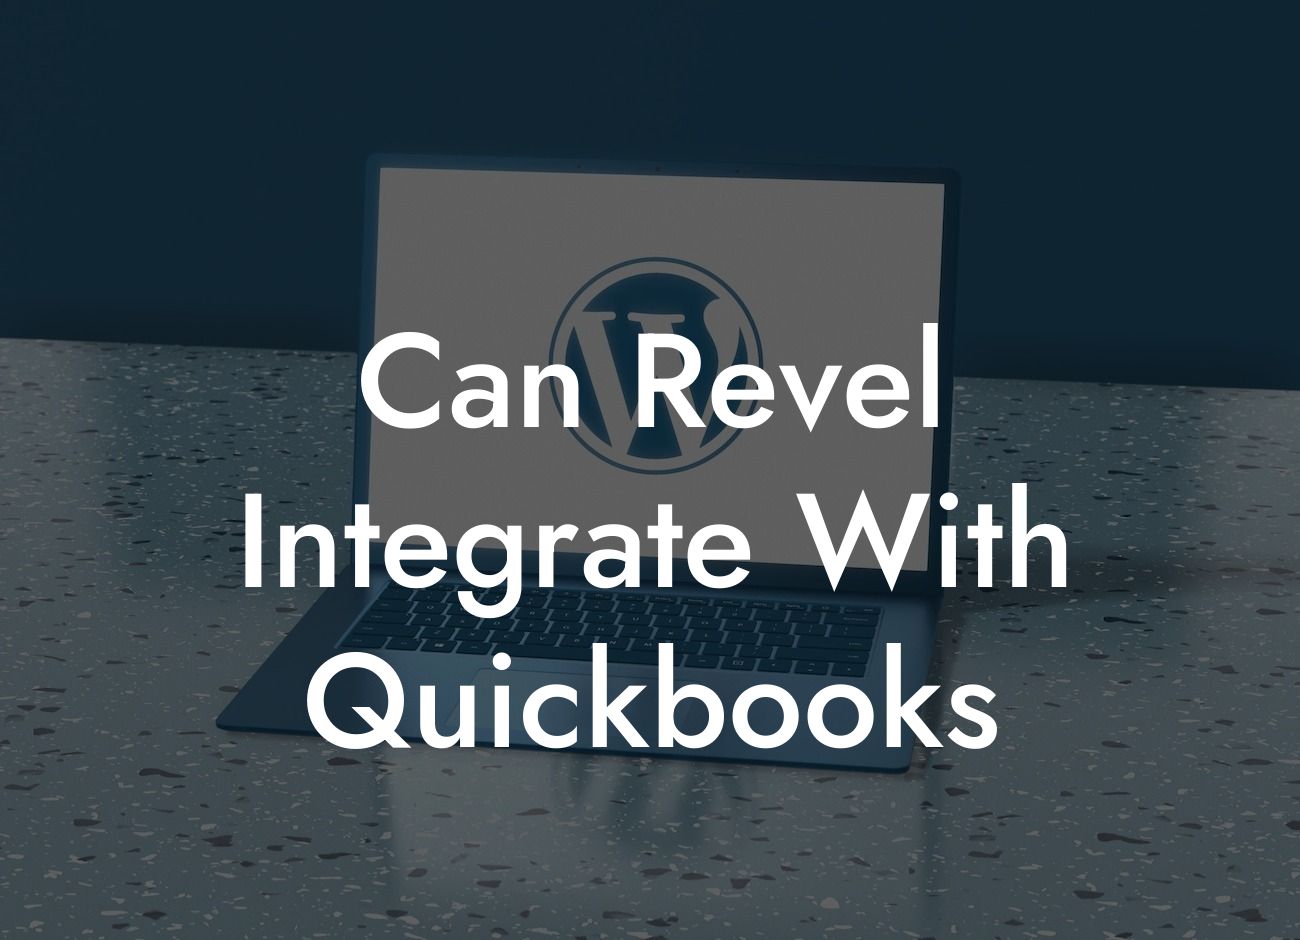 Can Revel Integrate With Quickbooks